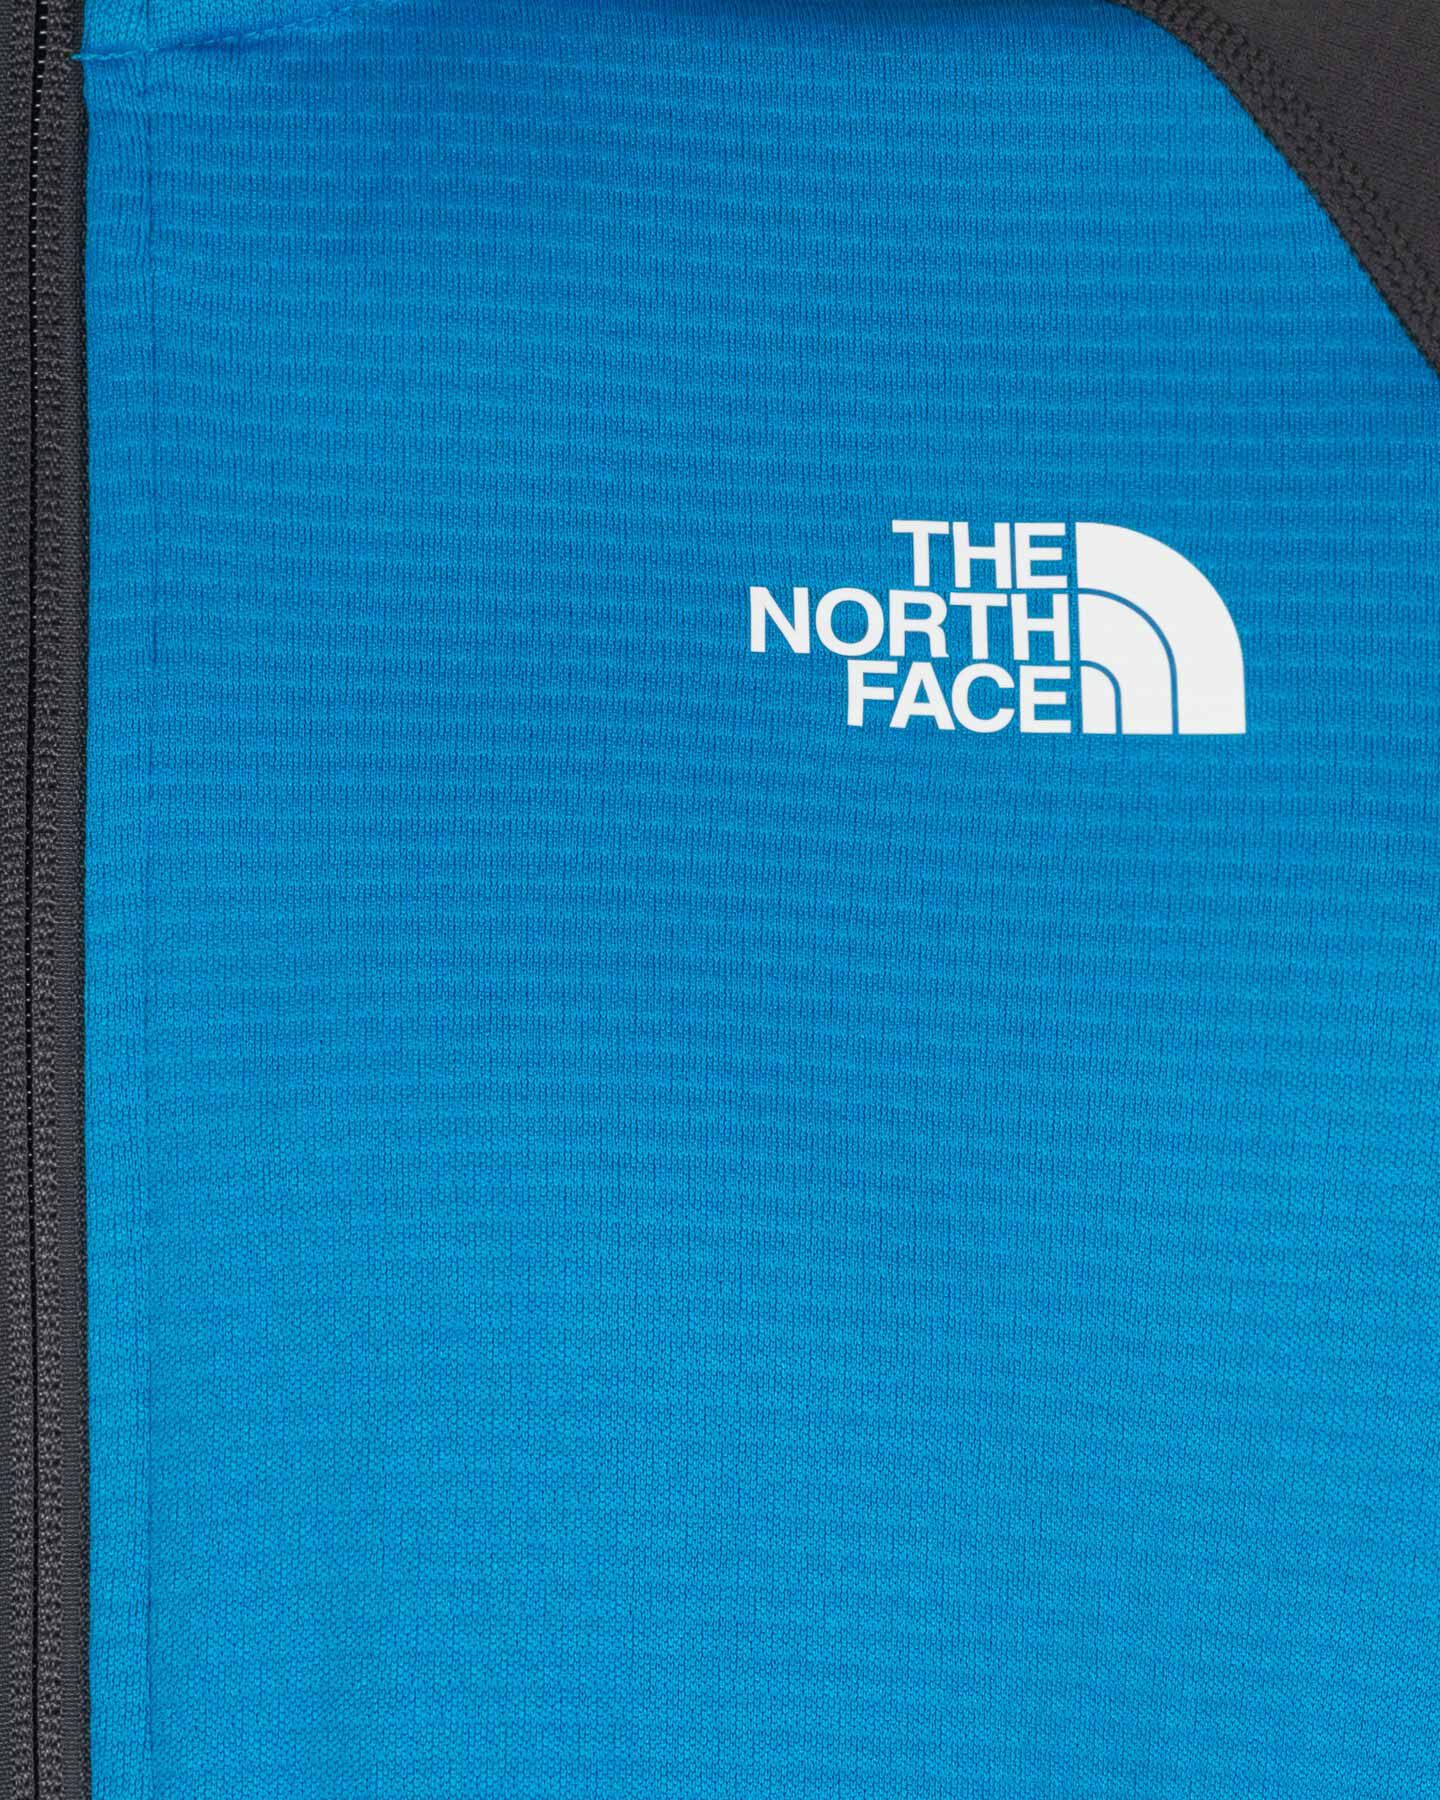  Pile THE NORTH FACE MUTTSEE M S5666500|XAI|S scatto 2